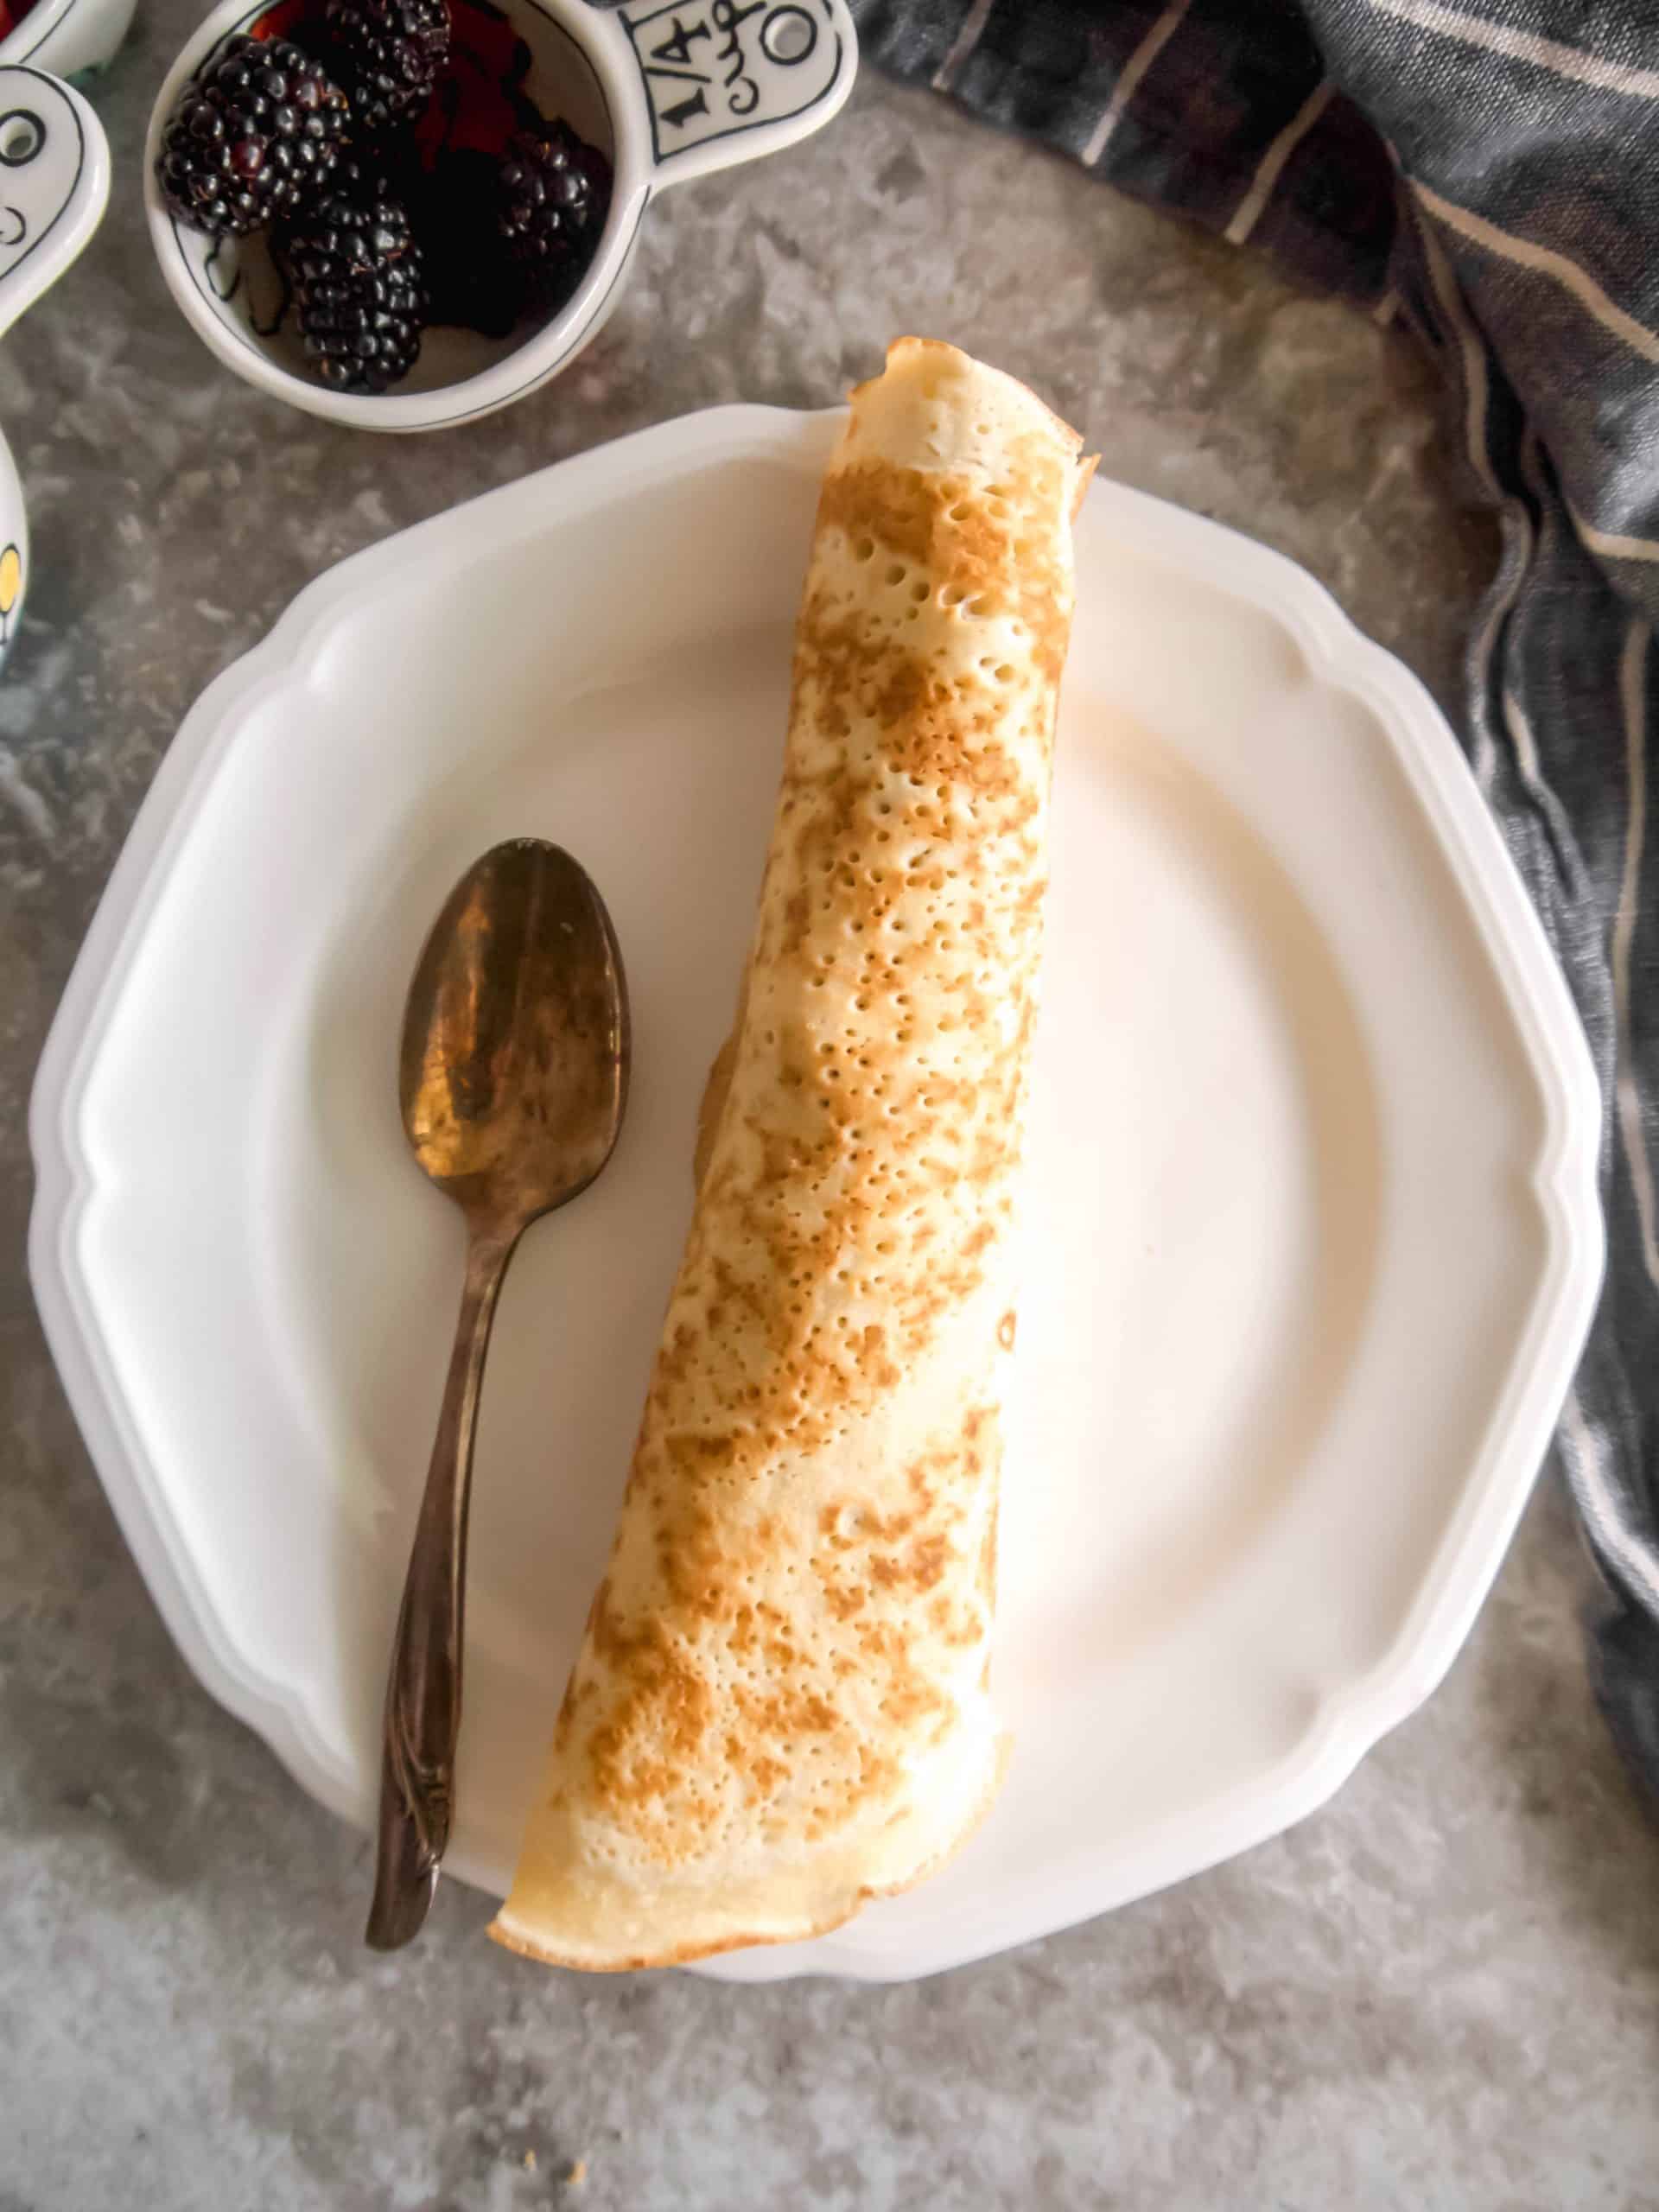 A fruit filled crepe rolled into a cigar shape.